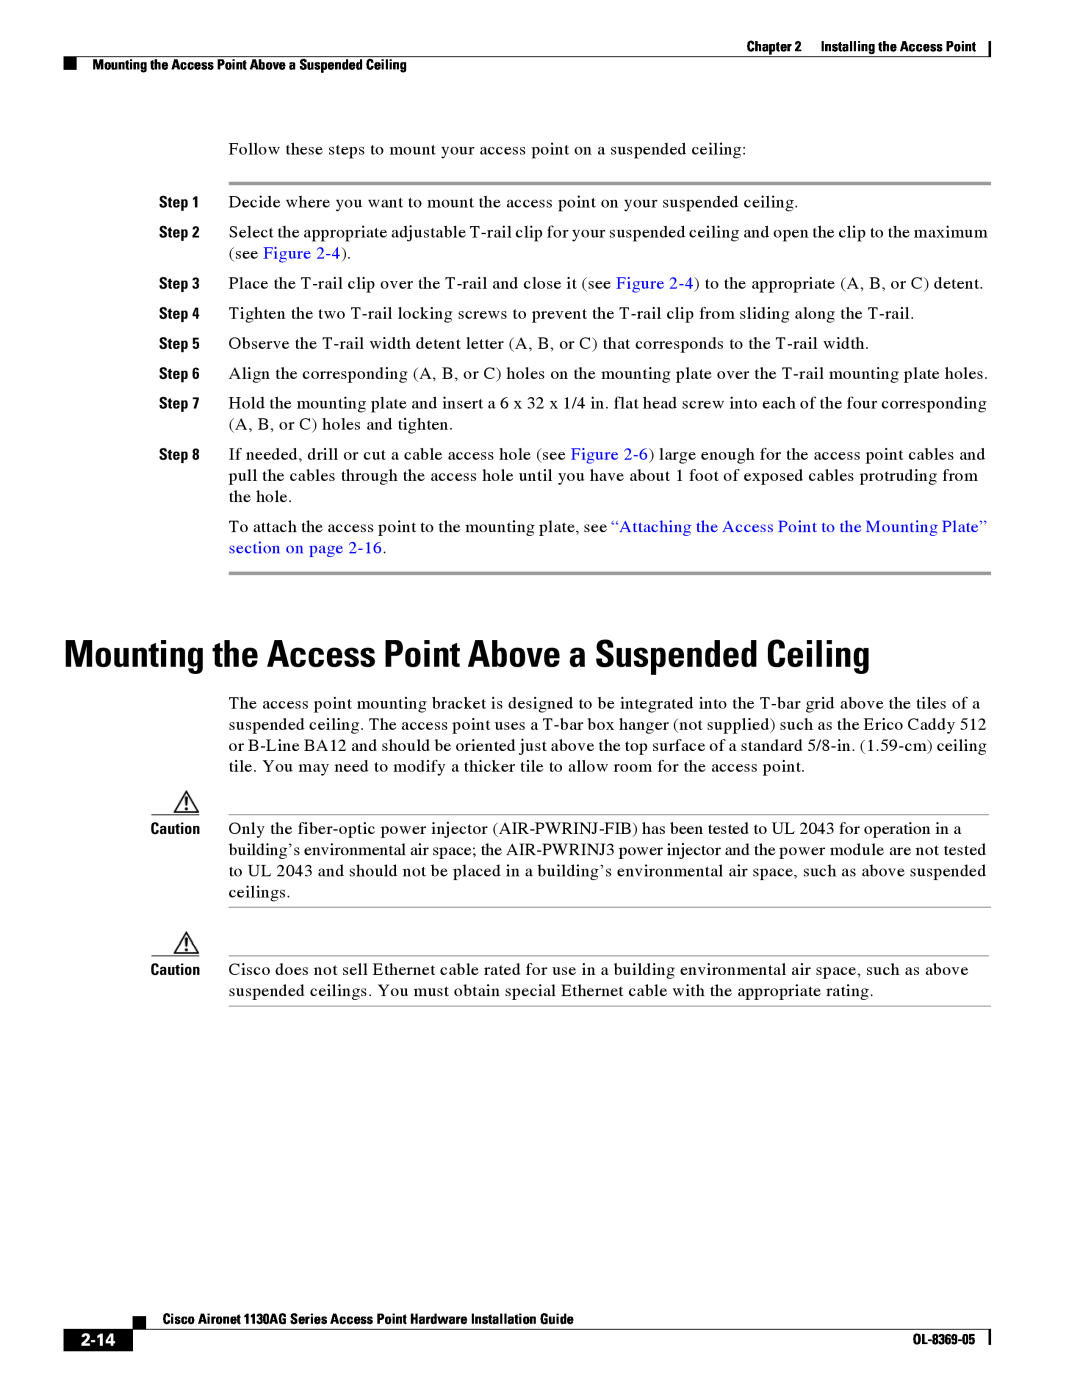 Cisco Systems 1130AG manual Mounting the Access Point Above a Suspended Ceiling, 2-14 